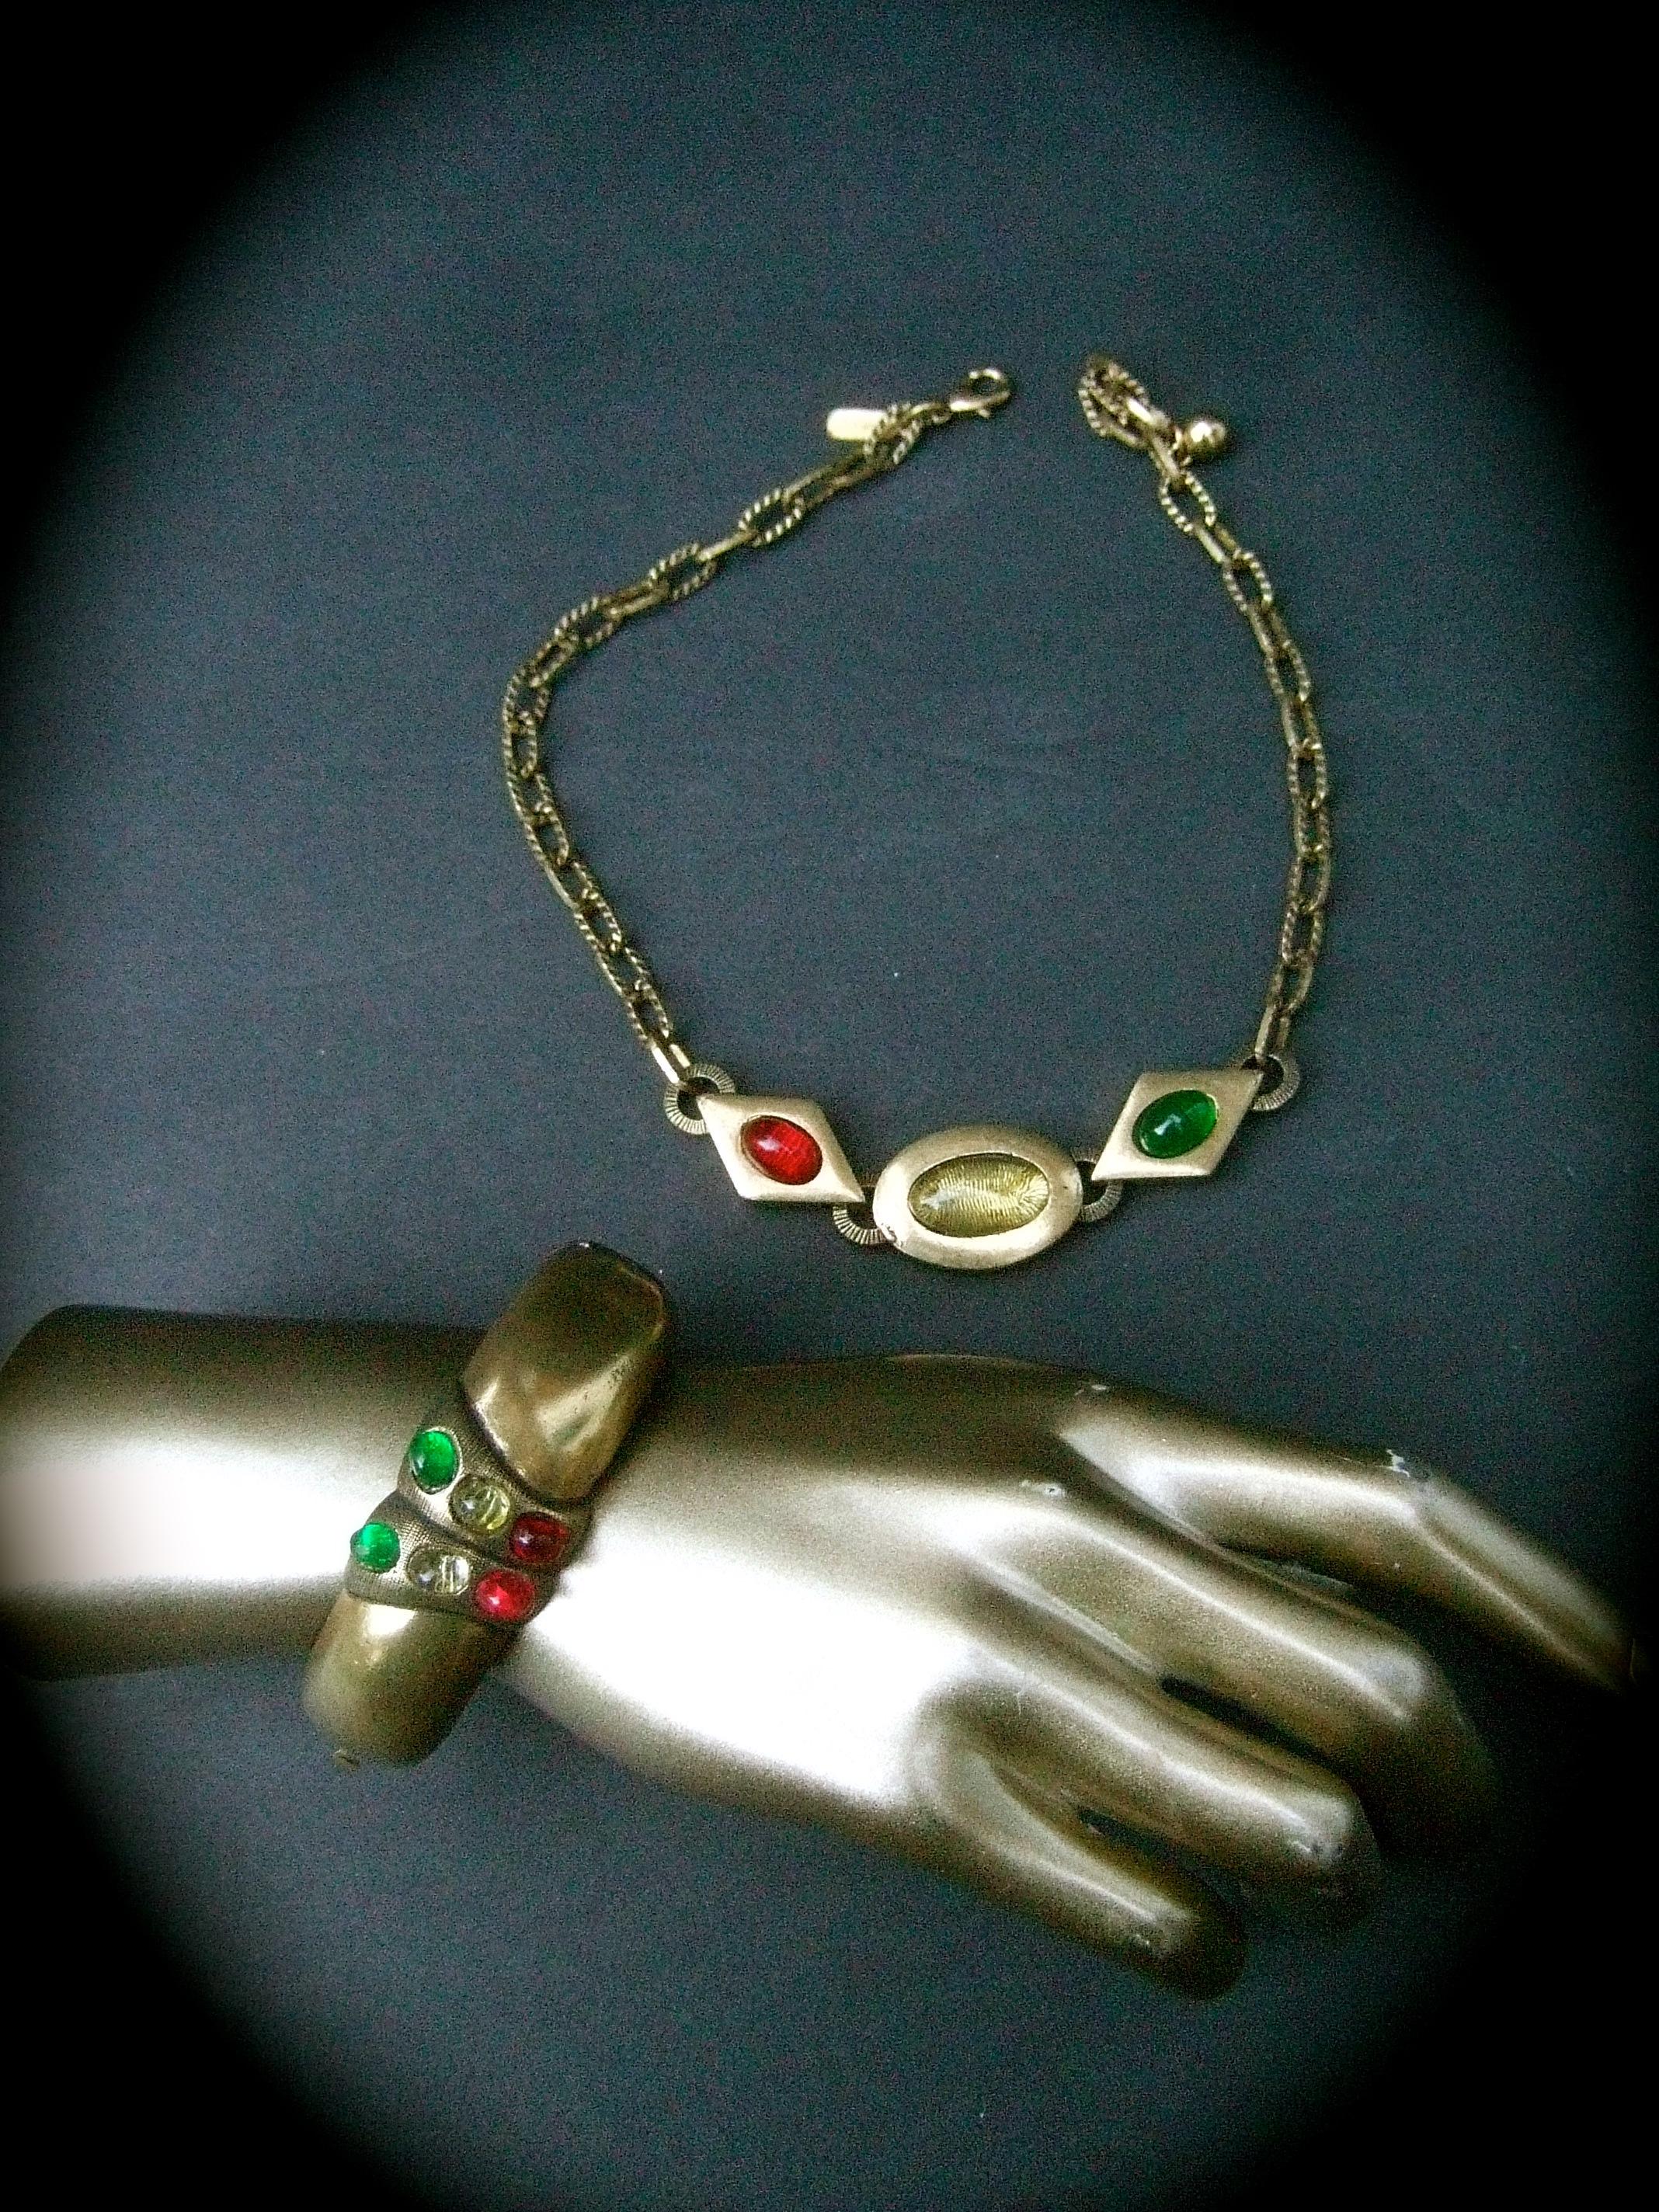 Geoffrey Beene Rare choker chain necklace & hinged bangle c 1970s 
The set is comprised of a gold matte tone metal choker necklace; embellished with three lucite cabochons in red, green & pale yellow settings

The trio of lucite cabochons are